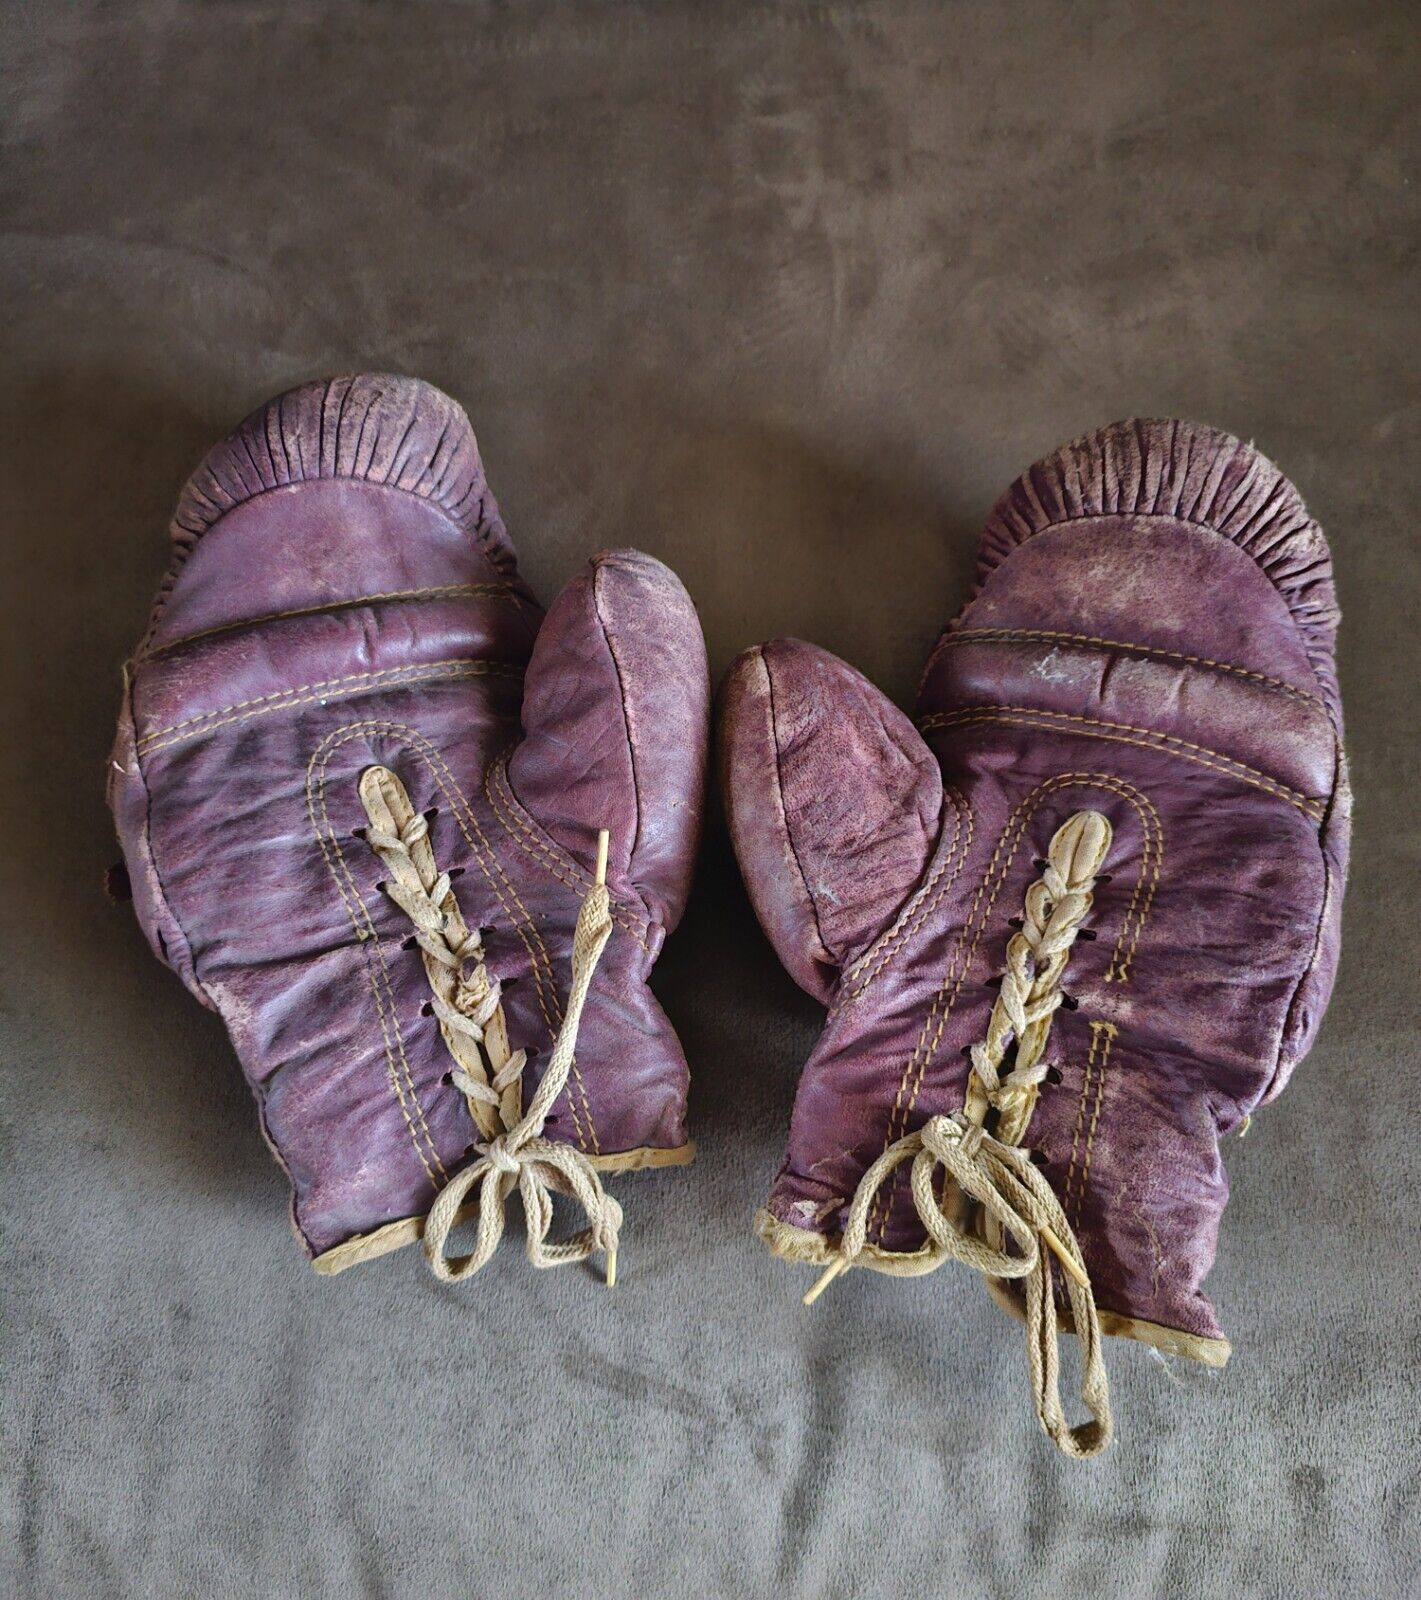 Late 1940's Pair of Boxing Gloves